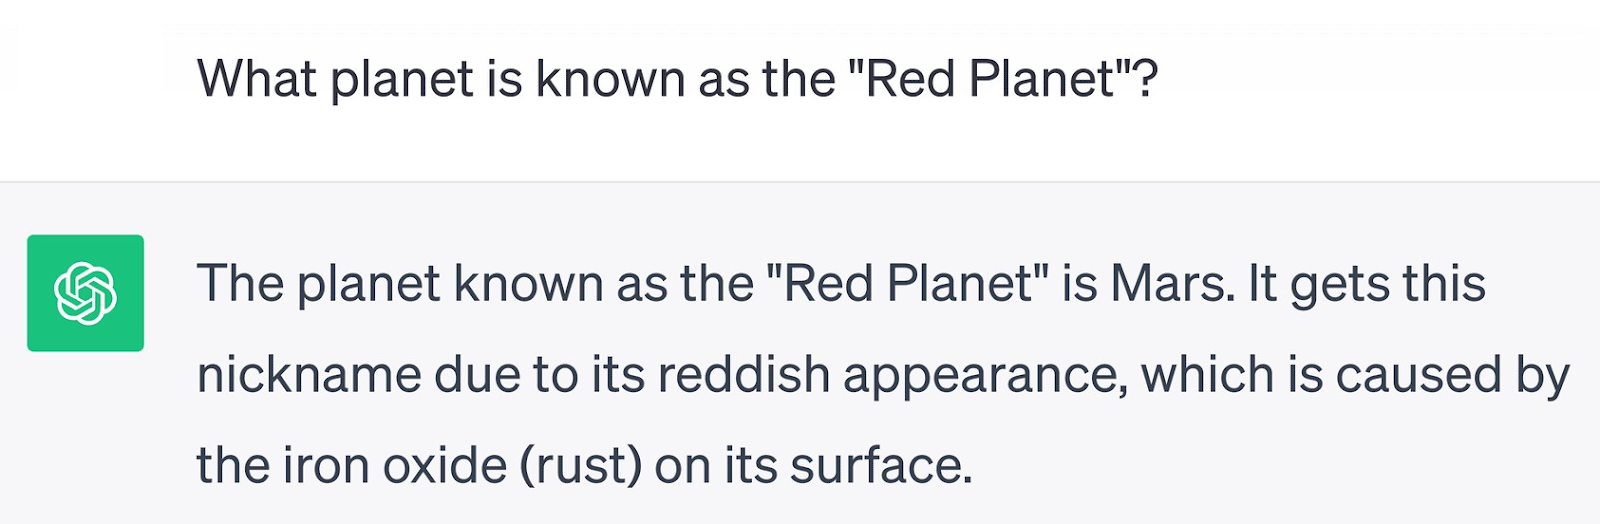 ChatGPT response to “What planet is known as the ‘Red Planet’?” prompt